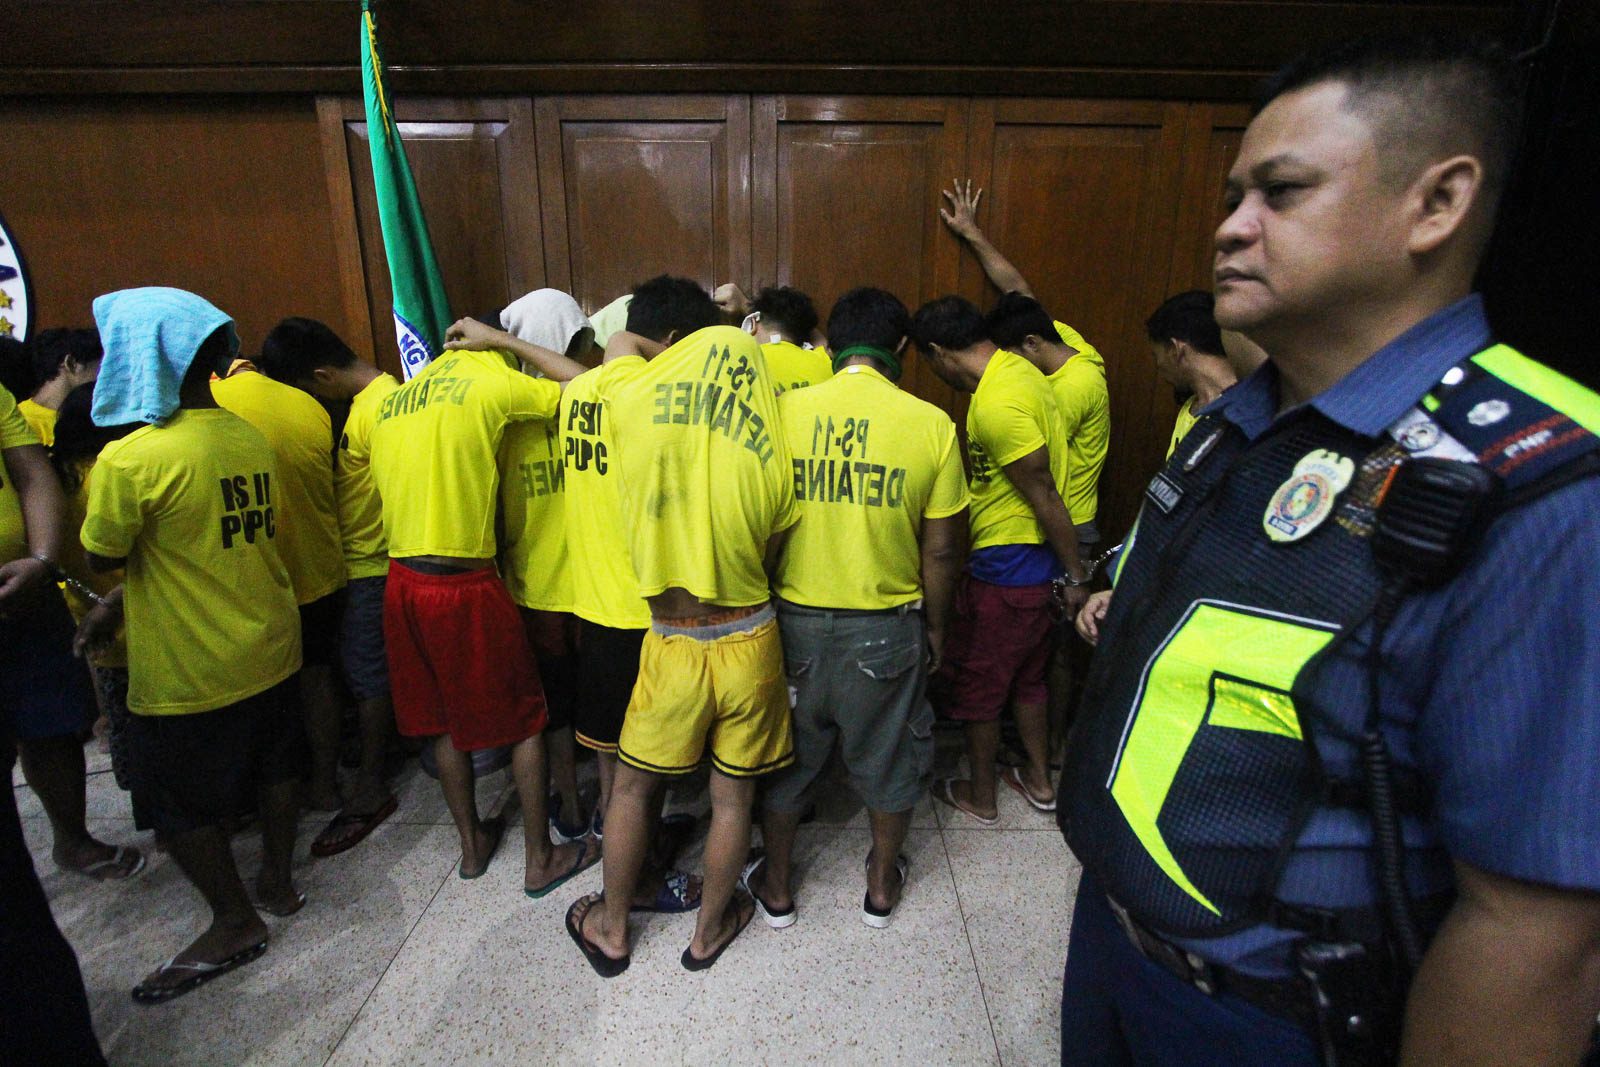 'FOR HUMAN RIGHTS.' The drug suspects are told to hide their faces and turn around during the press conference. Photo by Ben Nabong/Rappler 